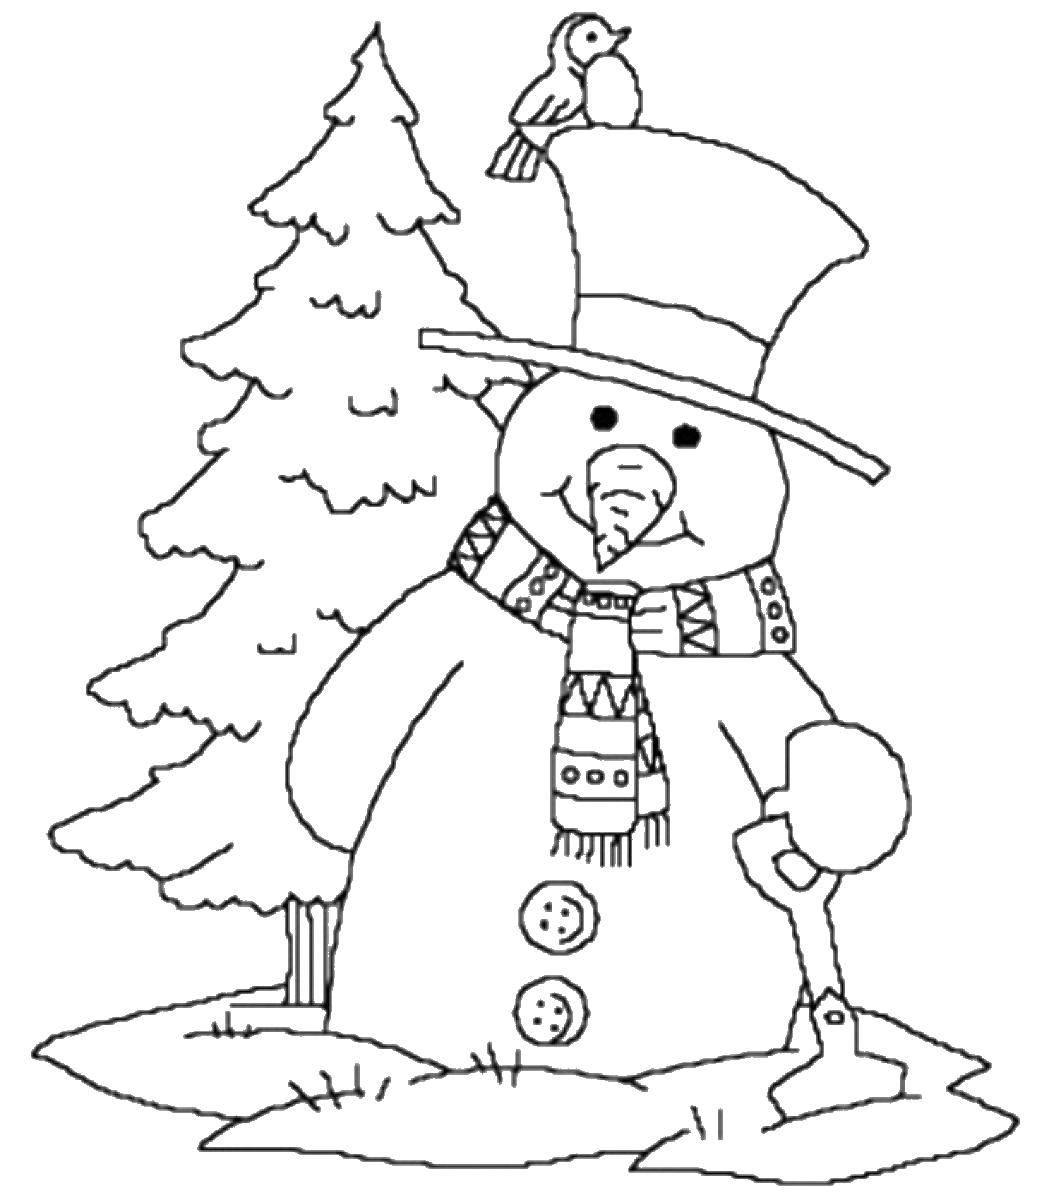 Coloring Snowman with bird. Category coloring winter. Tags:  winter, snowman, bird.